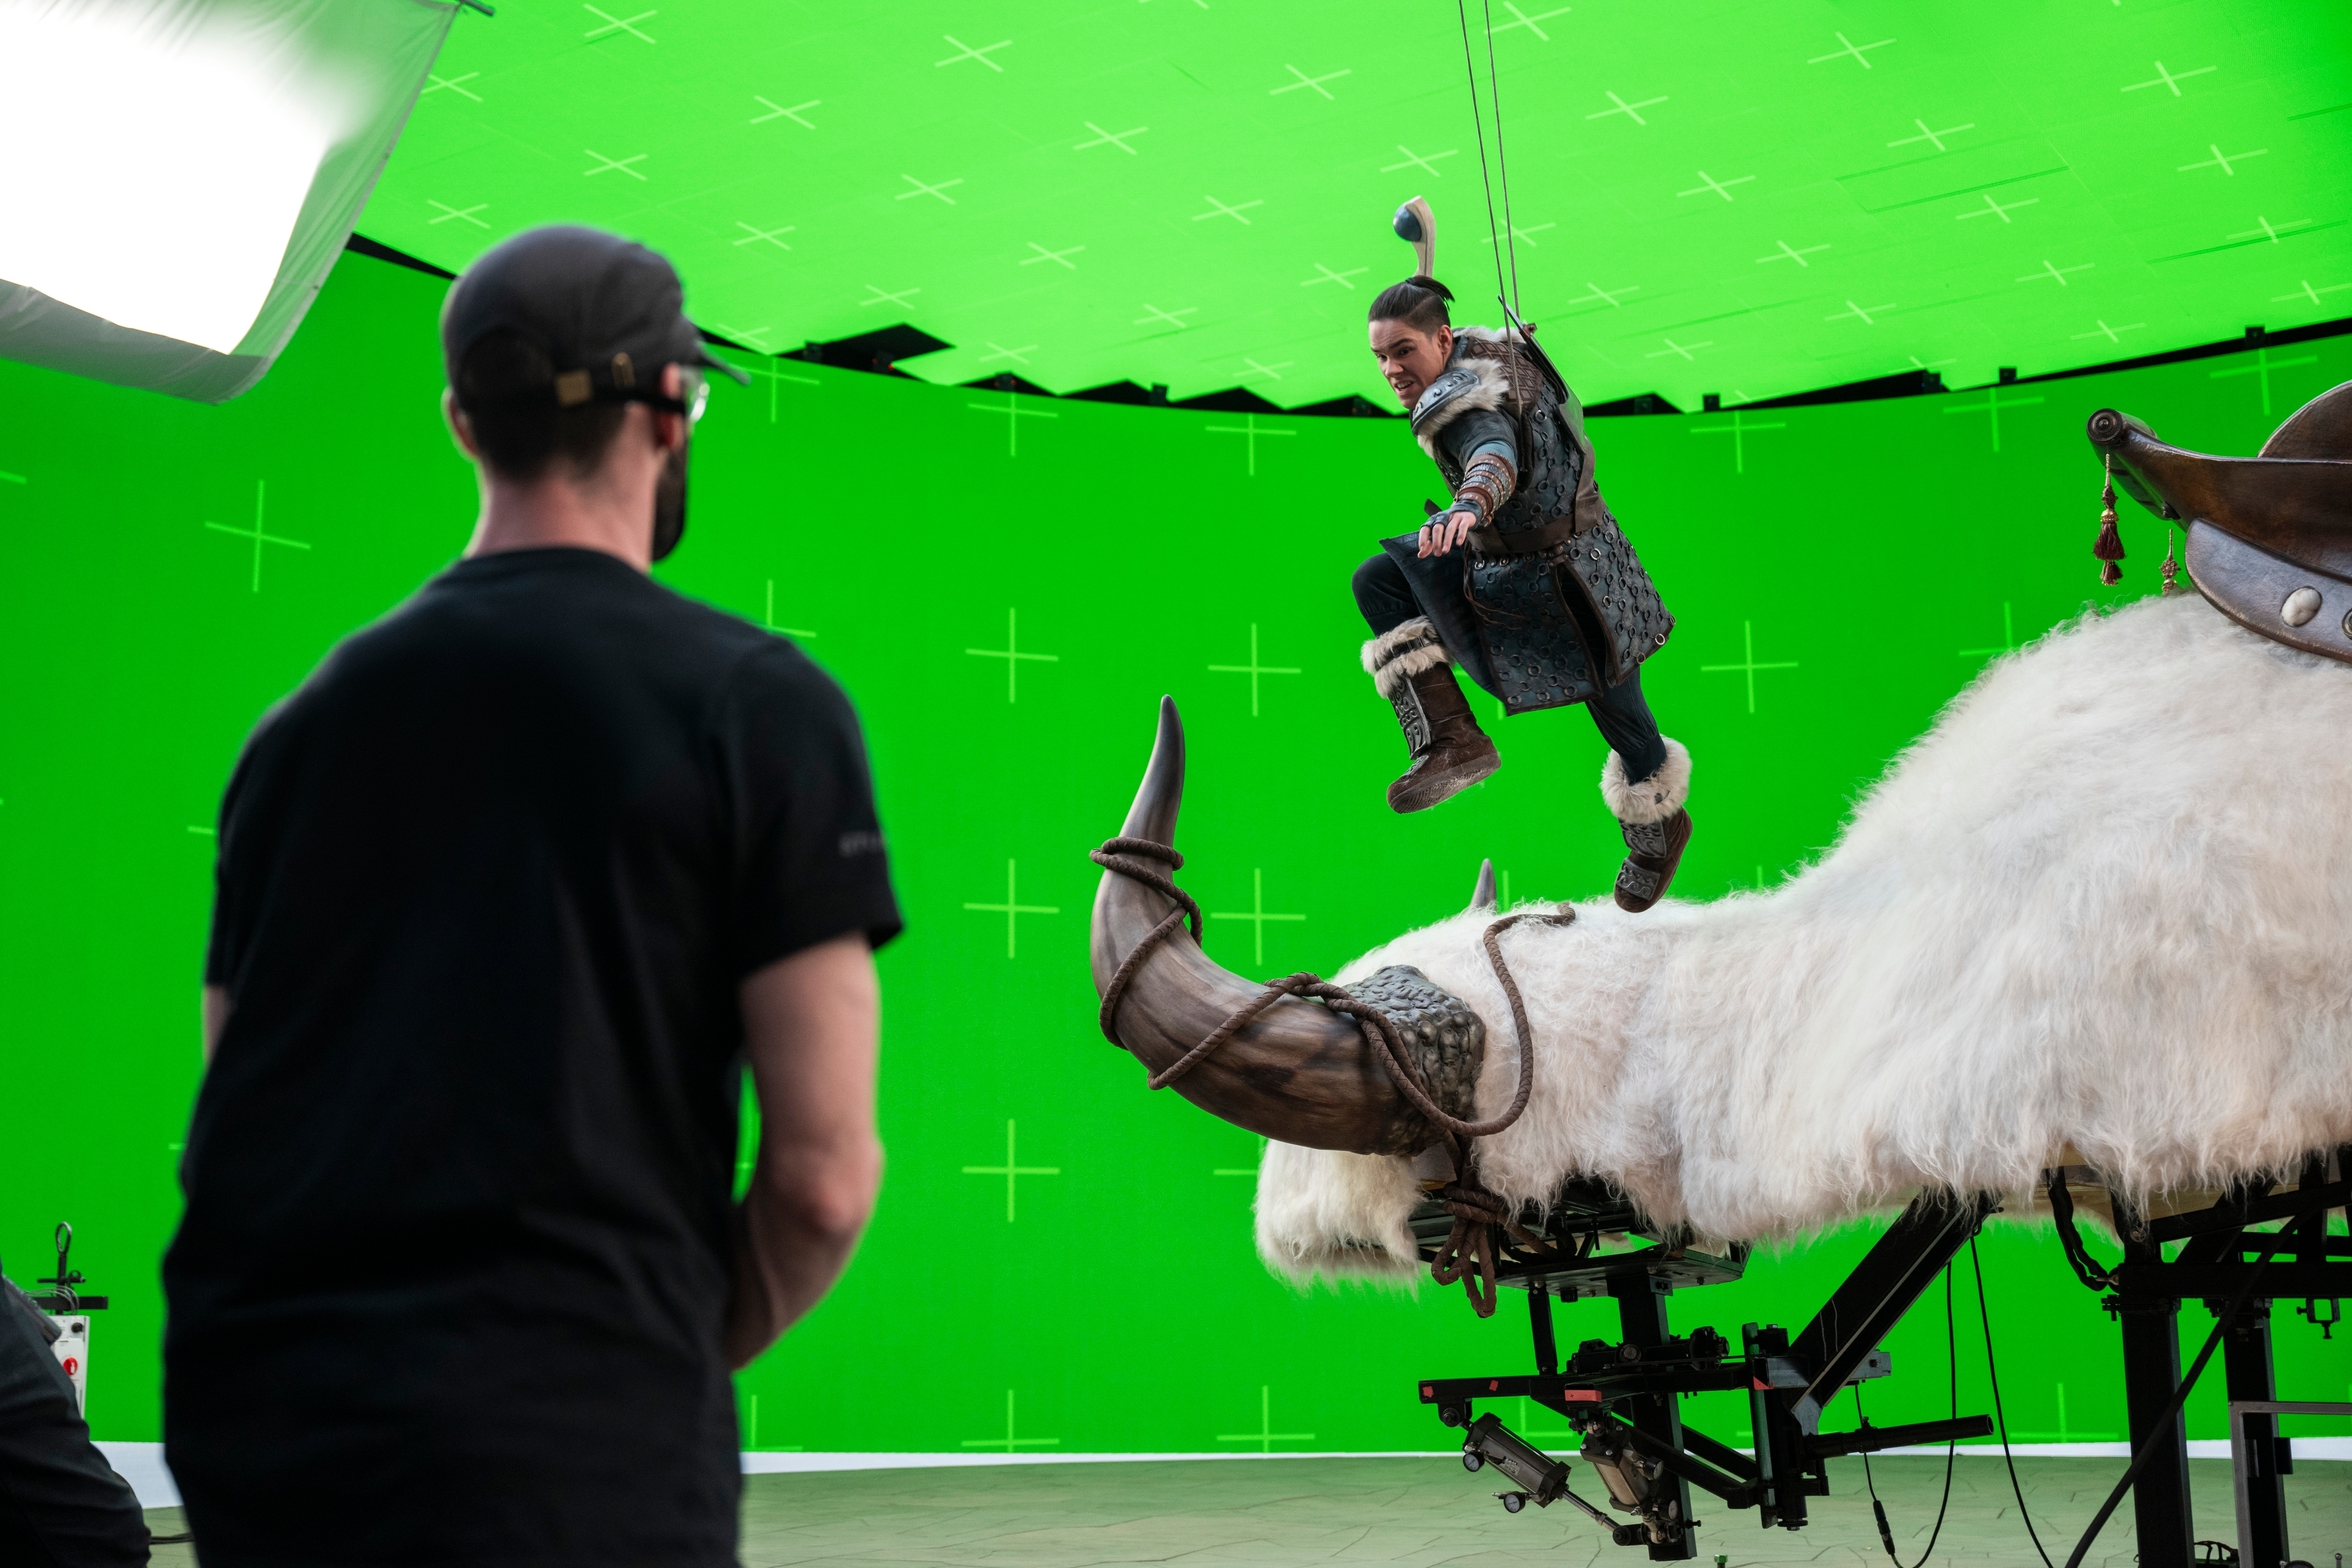 Actor in costume performs on mechanical bull against green screen with technician watching